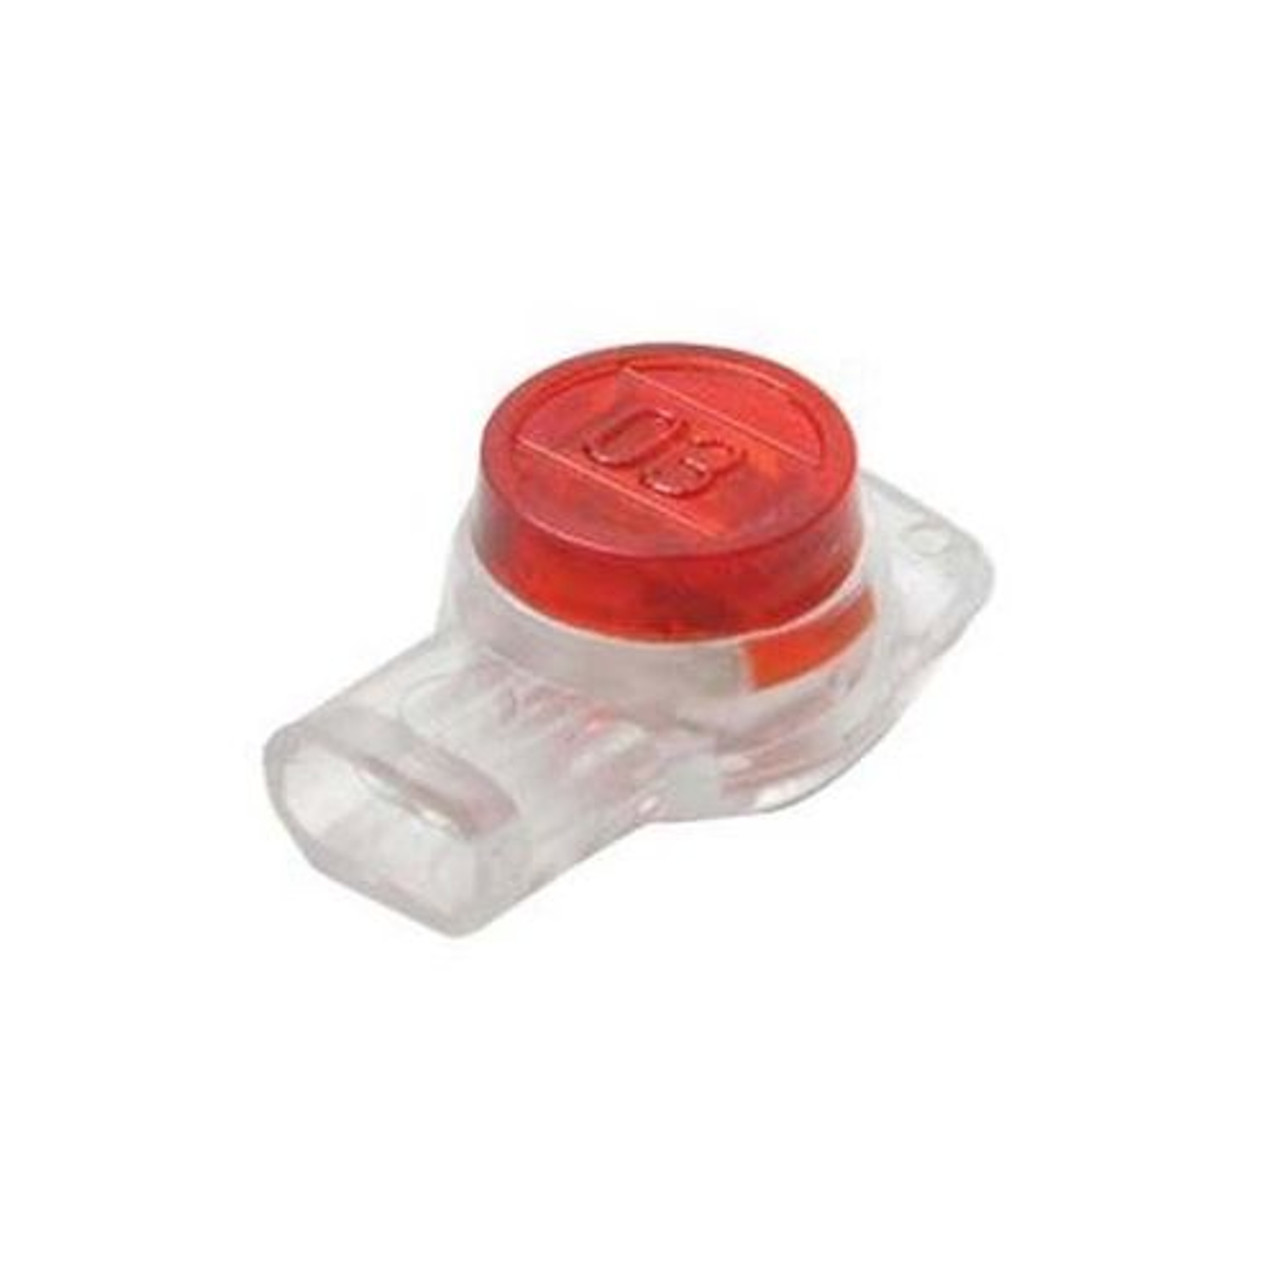 Steren 300-076 UR2 Connector 50 Pack 3-wire 1DC Red Slice 1 DC Insulation Displacement Connector Red Button Scotchlok 3M Type Telephone Crimp 19-26 AWG UG Modular Data  50 Pack